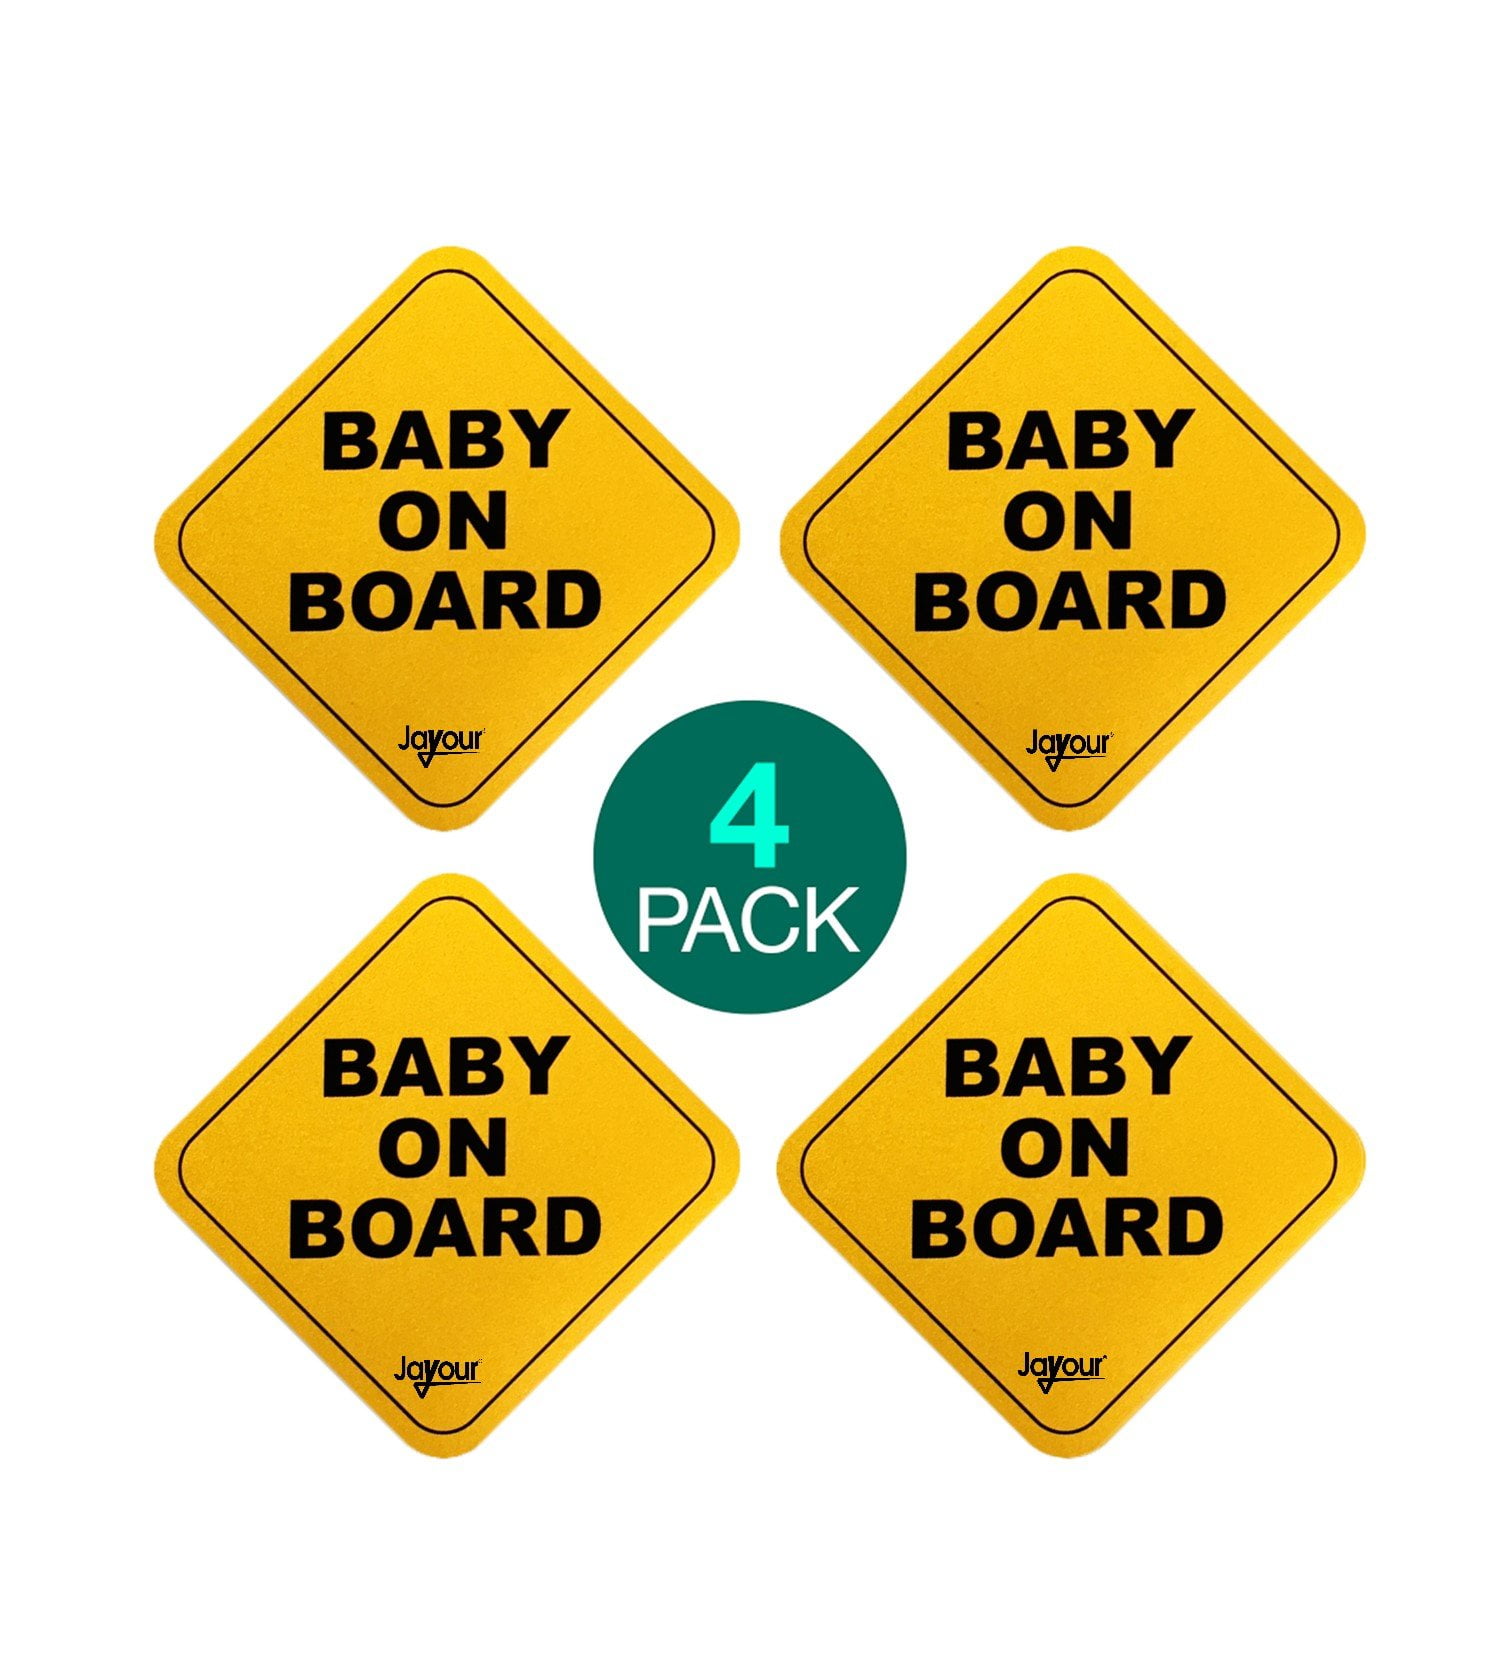 CHILD ON BOARD SAFETY REFLECTIVE Magnetic Sign NEW Heavy Duty On & Off with Ease